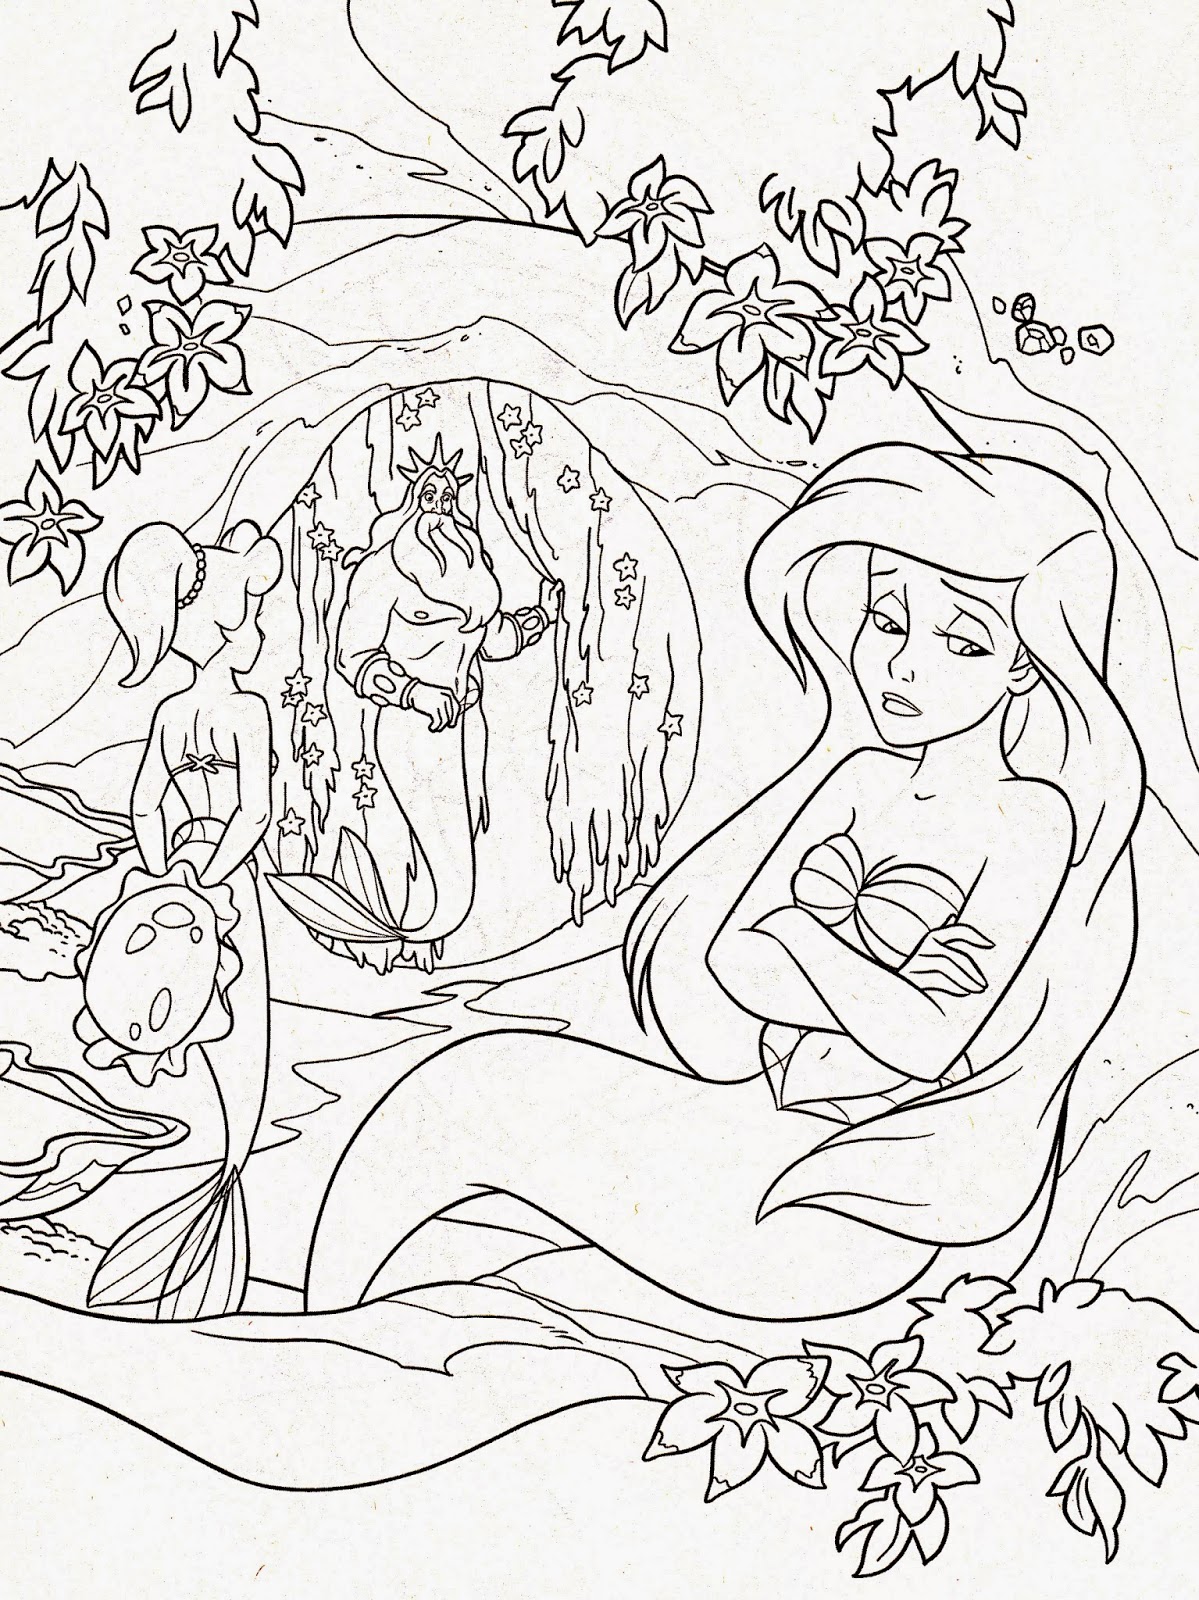 Coloring Pages: Disney Coloring Pages Free and Printable